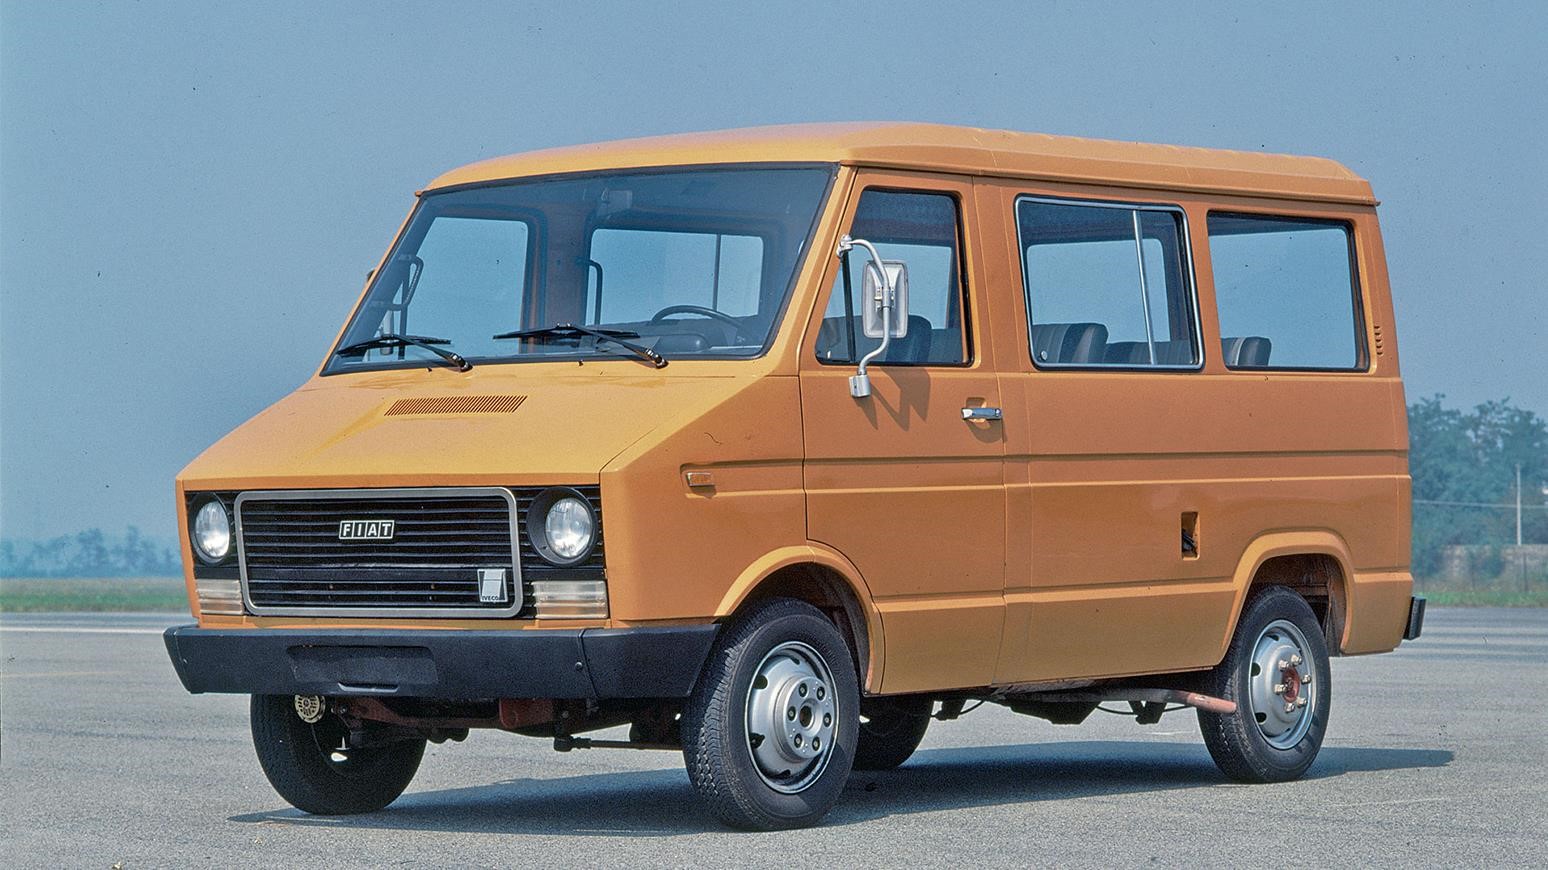 Let’s Go To Work: A Brief History Of The IVECO Daily